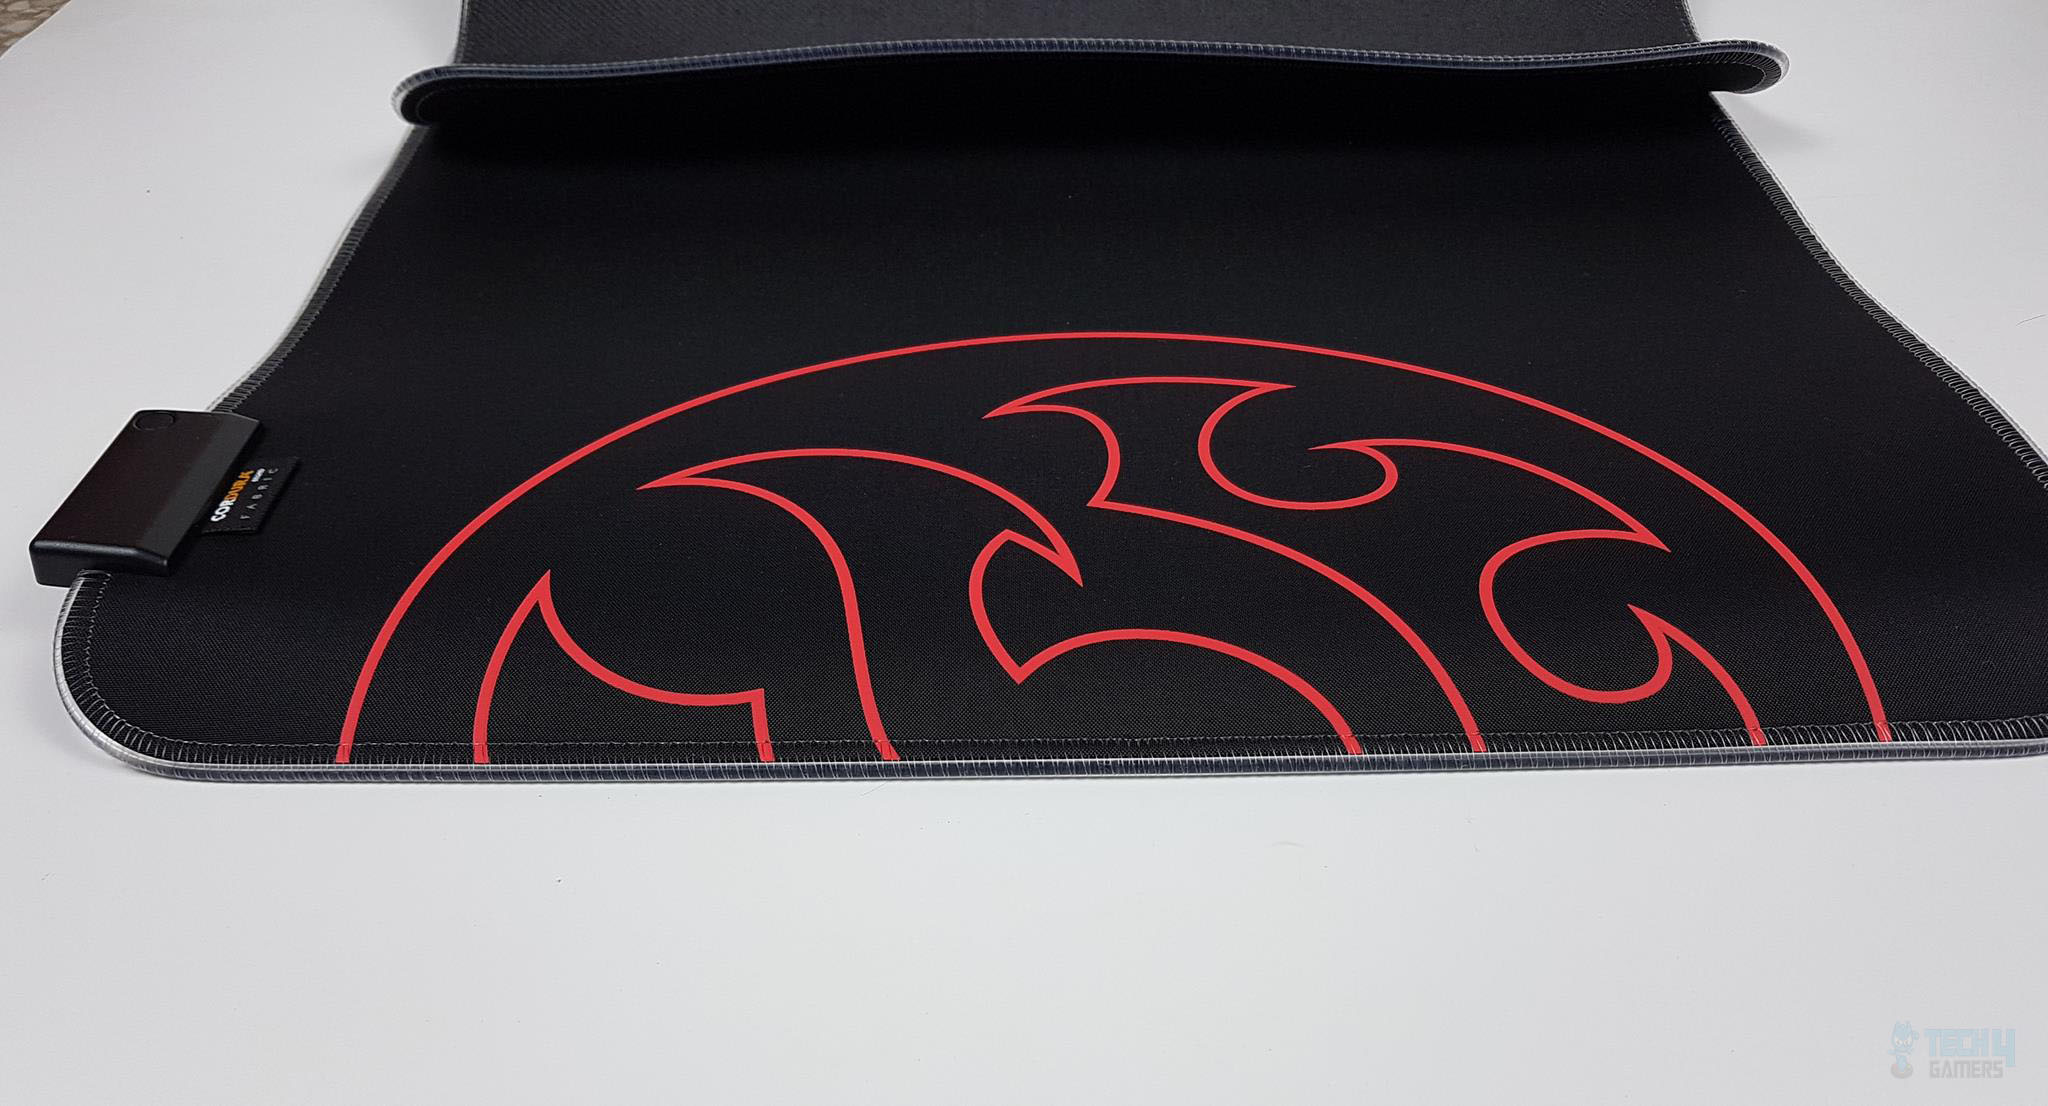 RGB xl mouse pad Closer Look top right section